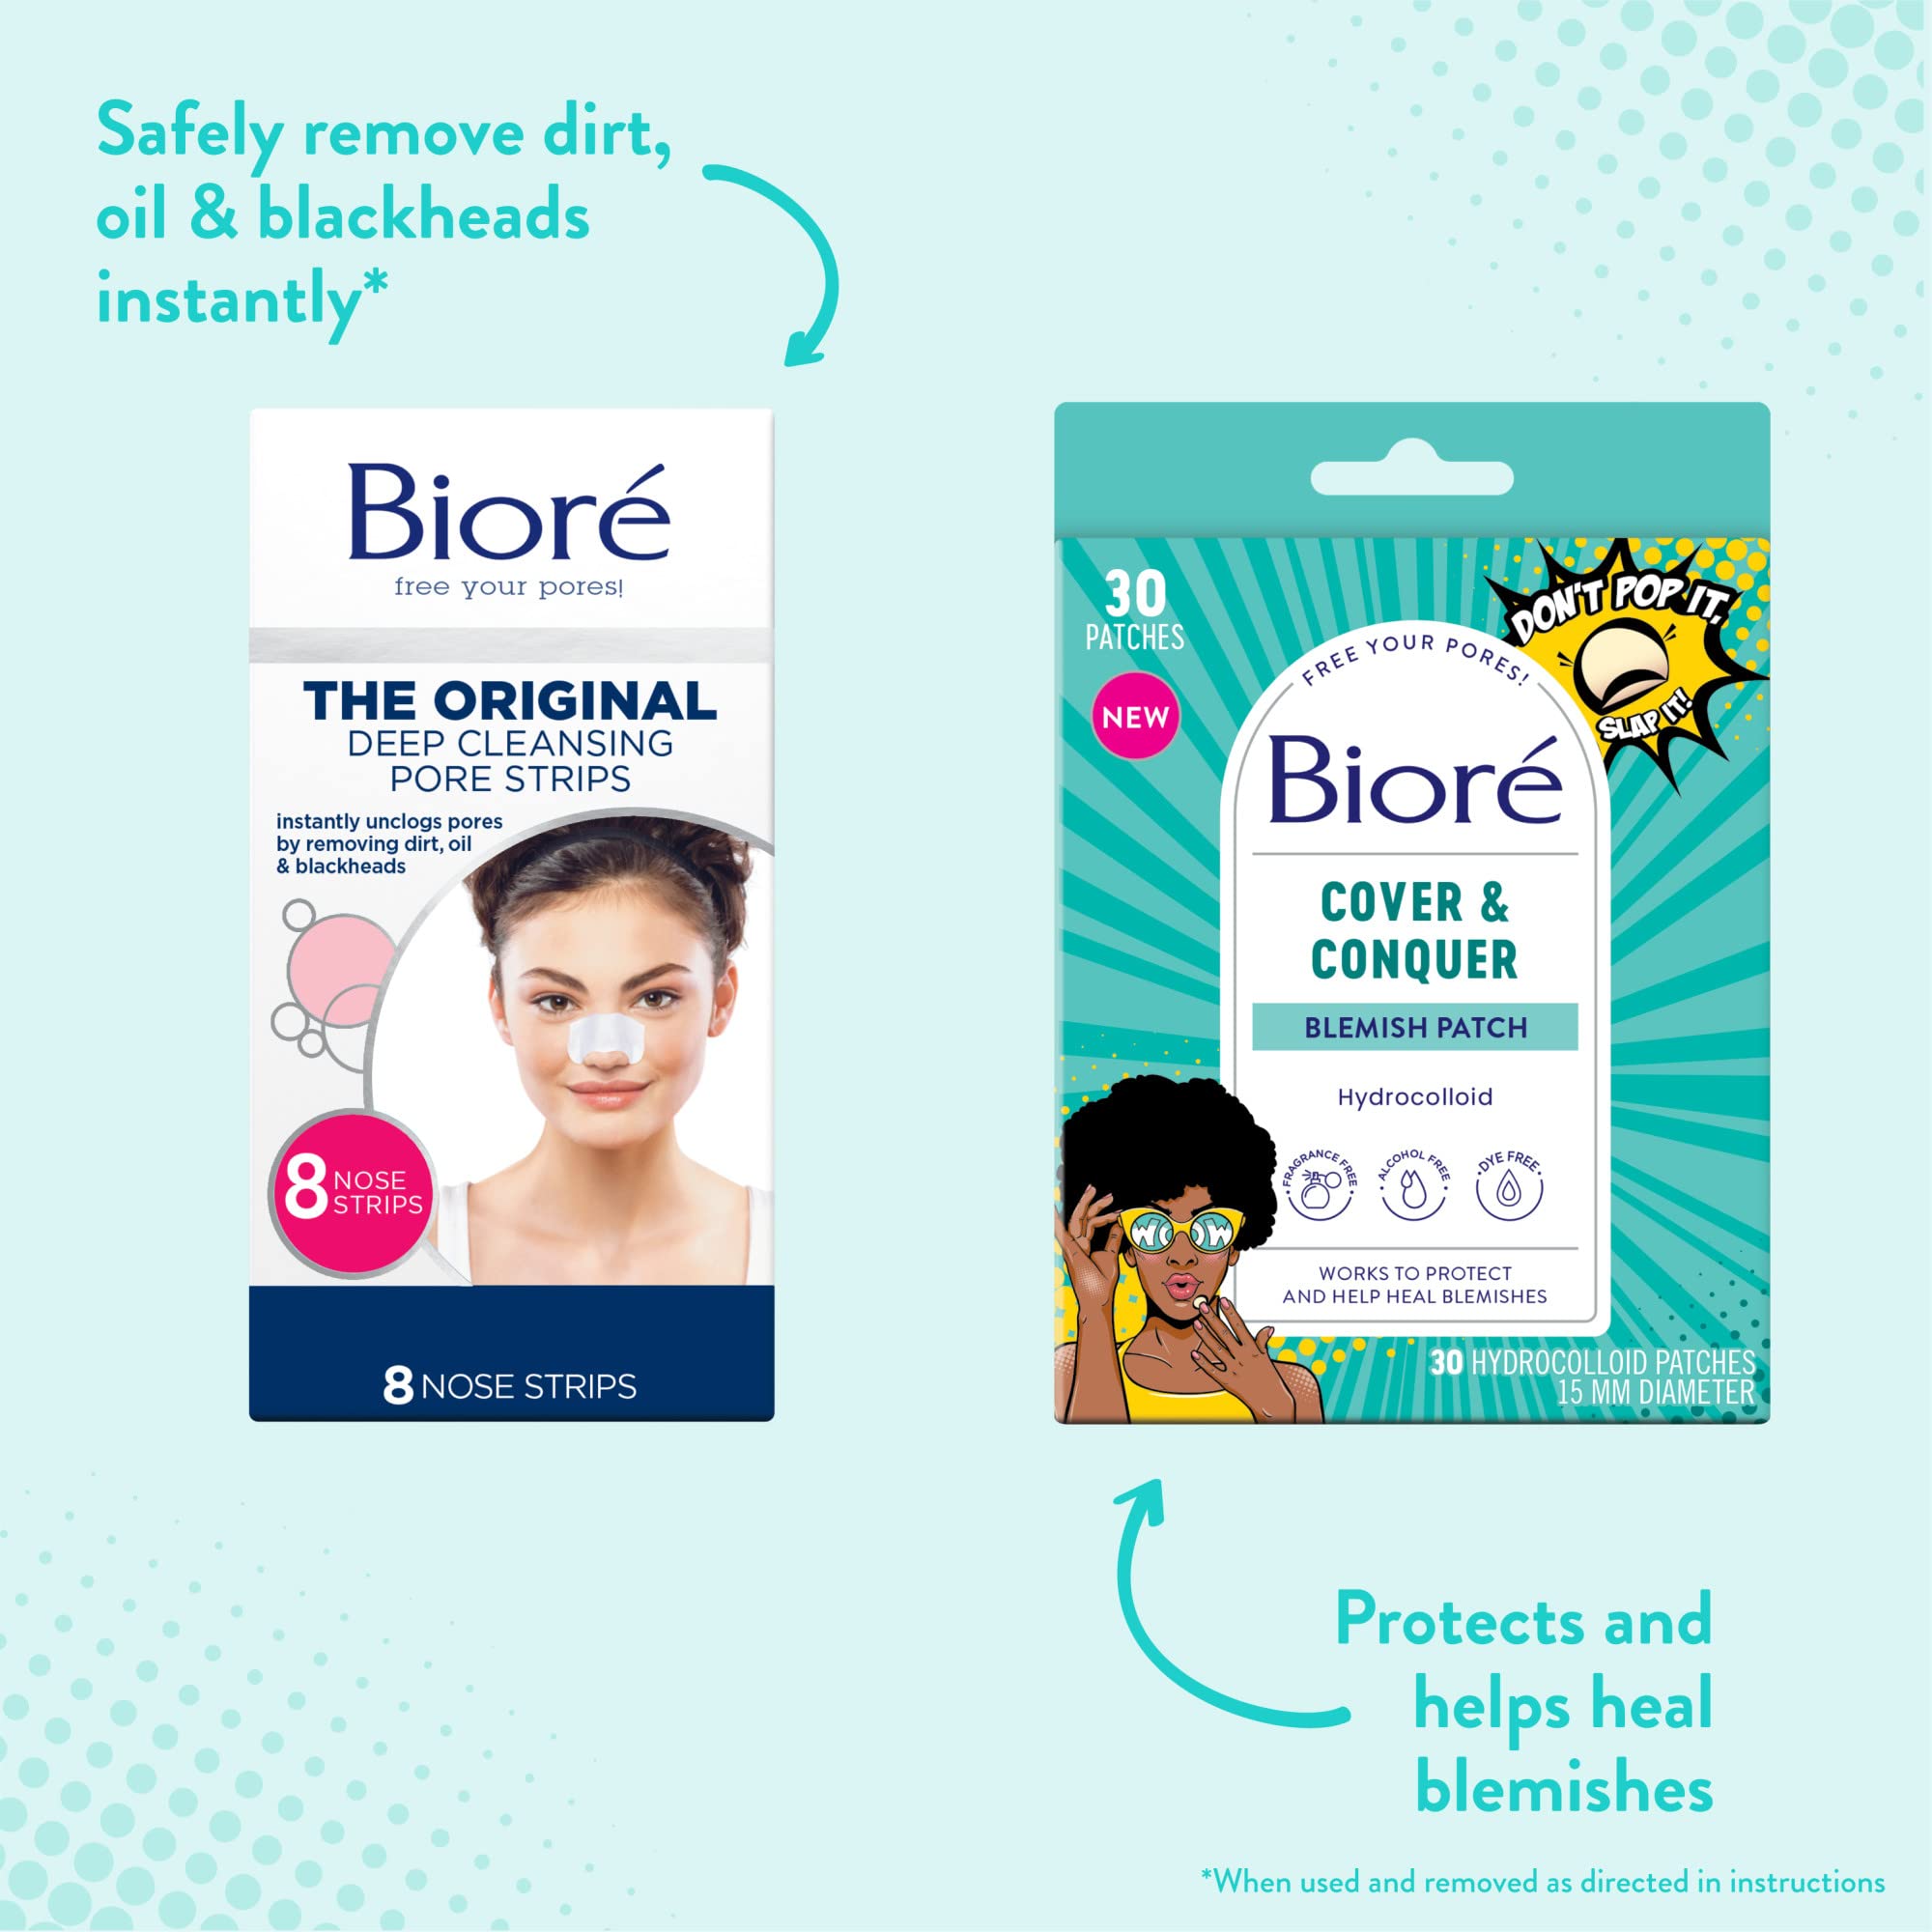 Biore Pimple Patches, Cover & Conquer Blemish Patch, Medical Grade Ultra-Thin Hydrocolloid for Covering Zits and Blemishes, HSA/FSA Approved, 30 count